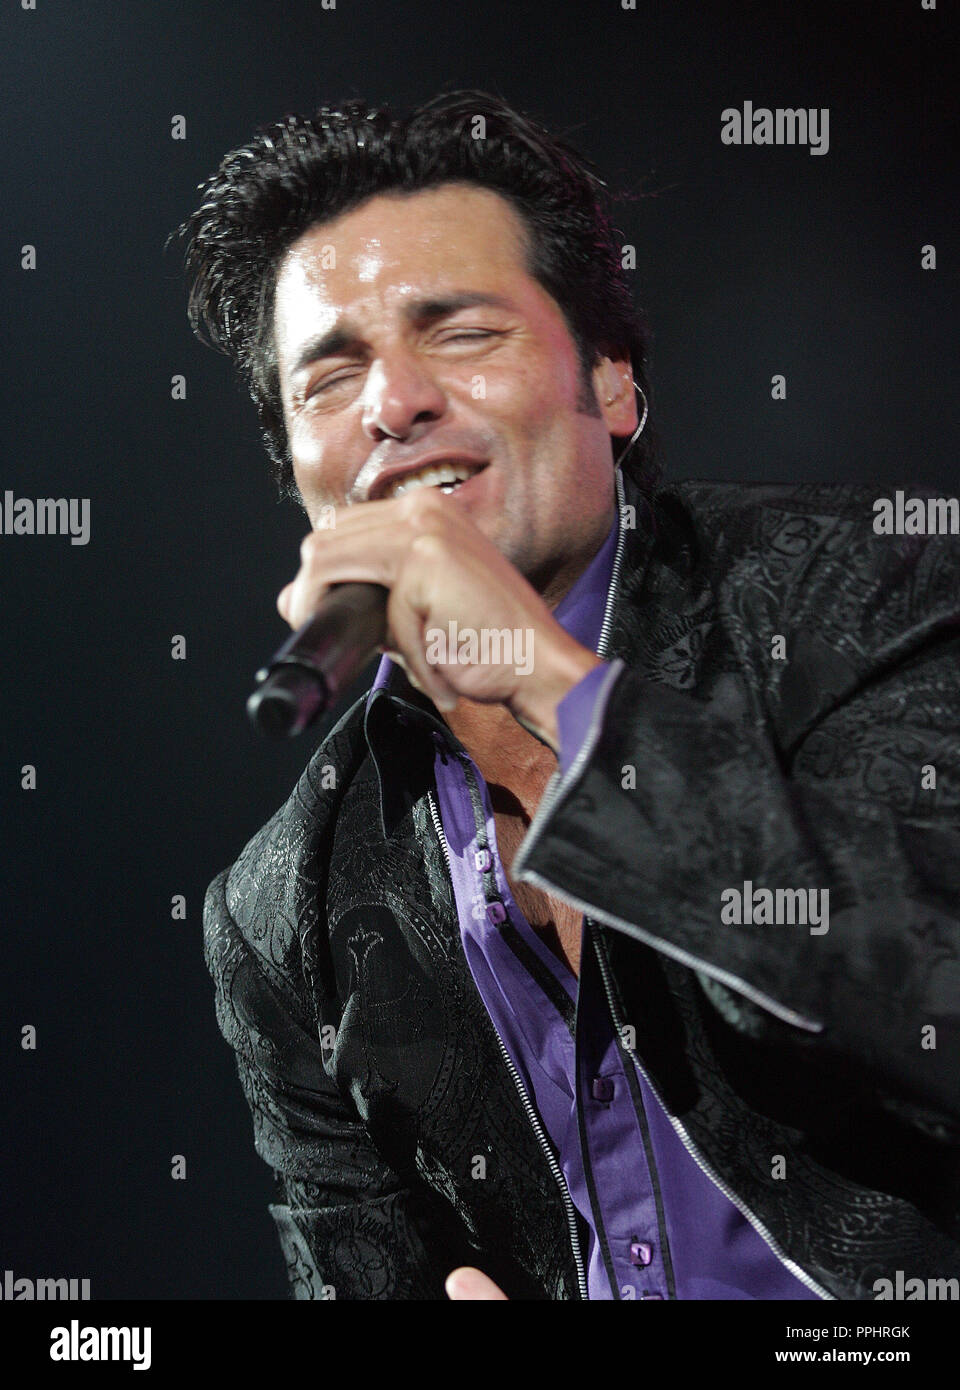 Chayanne performs in concert at the American Airlines Arena in Miami on June 4, 2010. Stock Photo